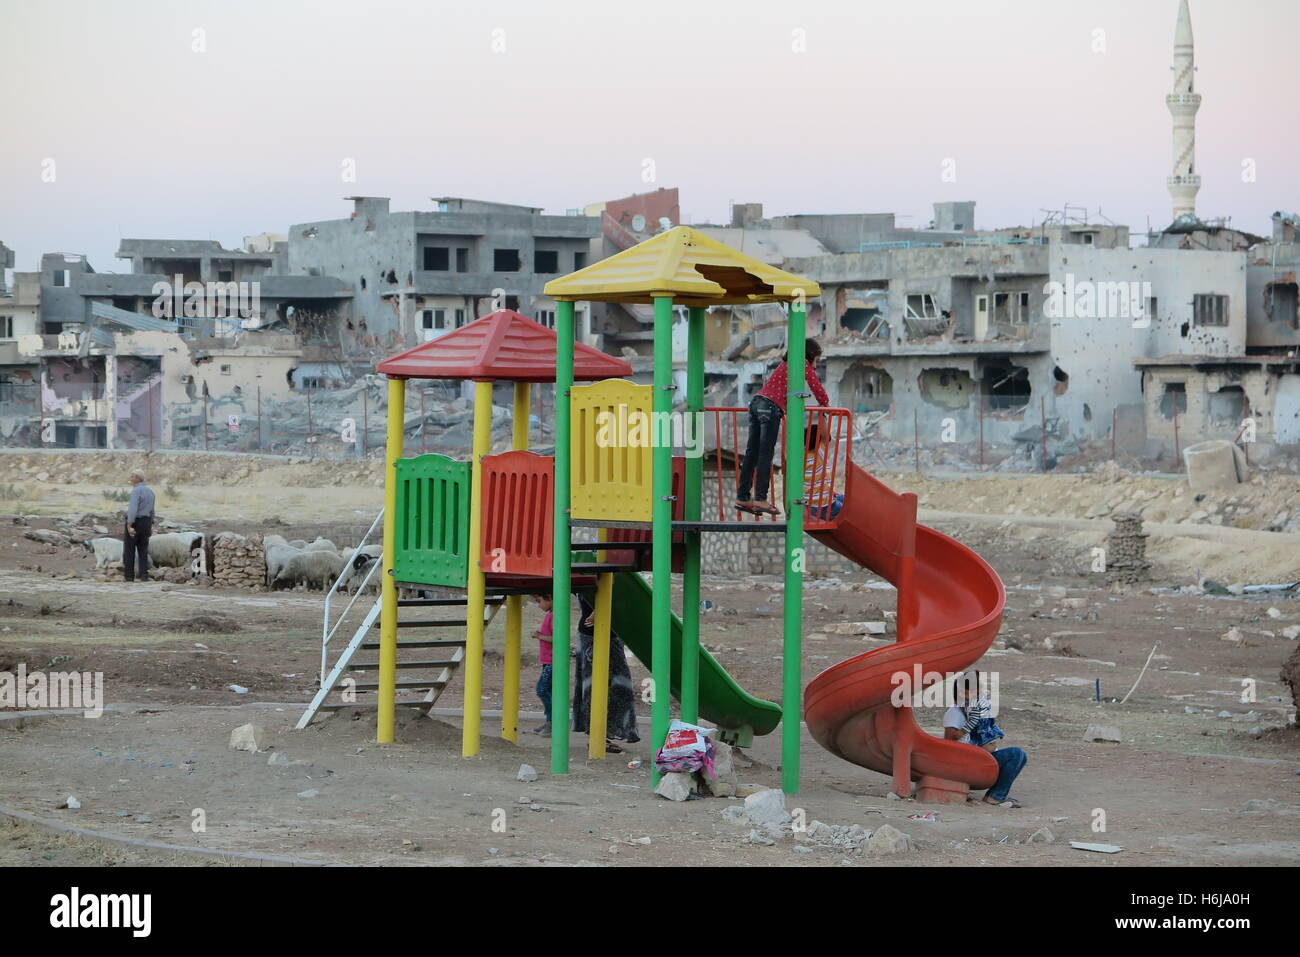 Nusaybin, Turkey. 20th Oct, 2016. A playground in front of the destroyed and closed down district Abdul Qadir Pasha in Nusaybin, Turkey, 20 October 2016. Whole districts of Kurdish cities in Turkey are destroyed, the displaced fear the upcoming winter. Fear, anger and hopelesness reign amongst the Kurds, as hardly anybody is interested in their fate. PHOTO: CAN MEREY/dpa/Alamy Live News Stock Photo